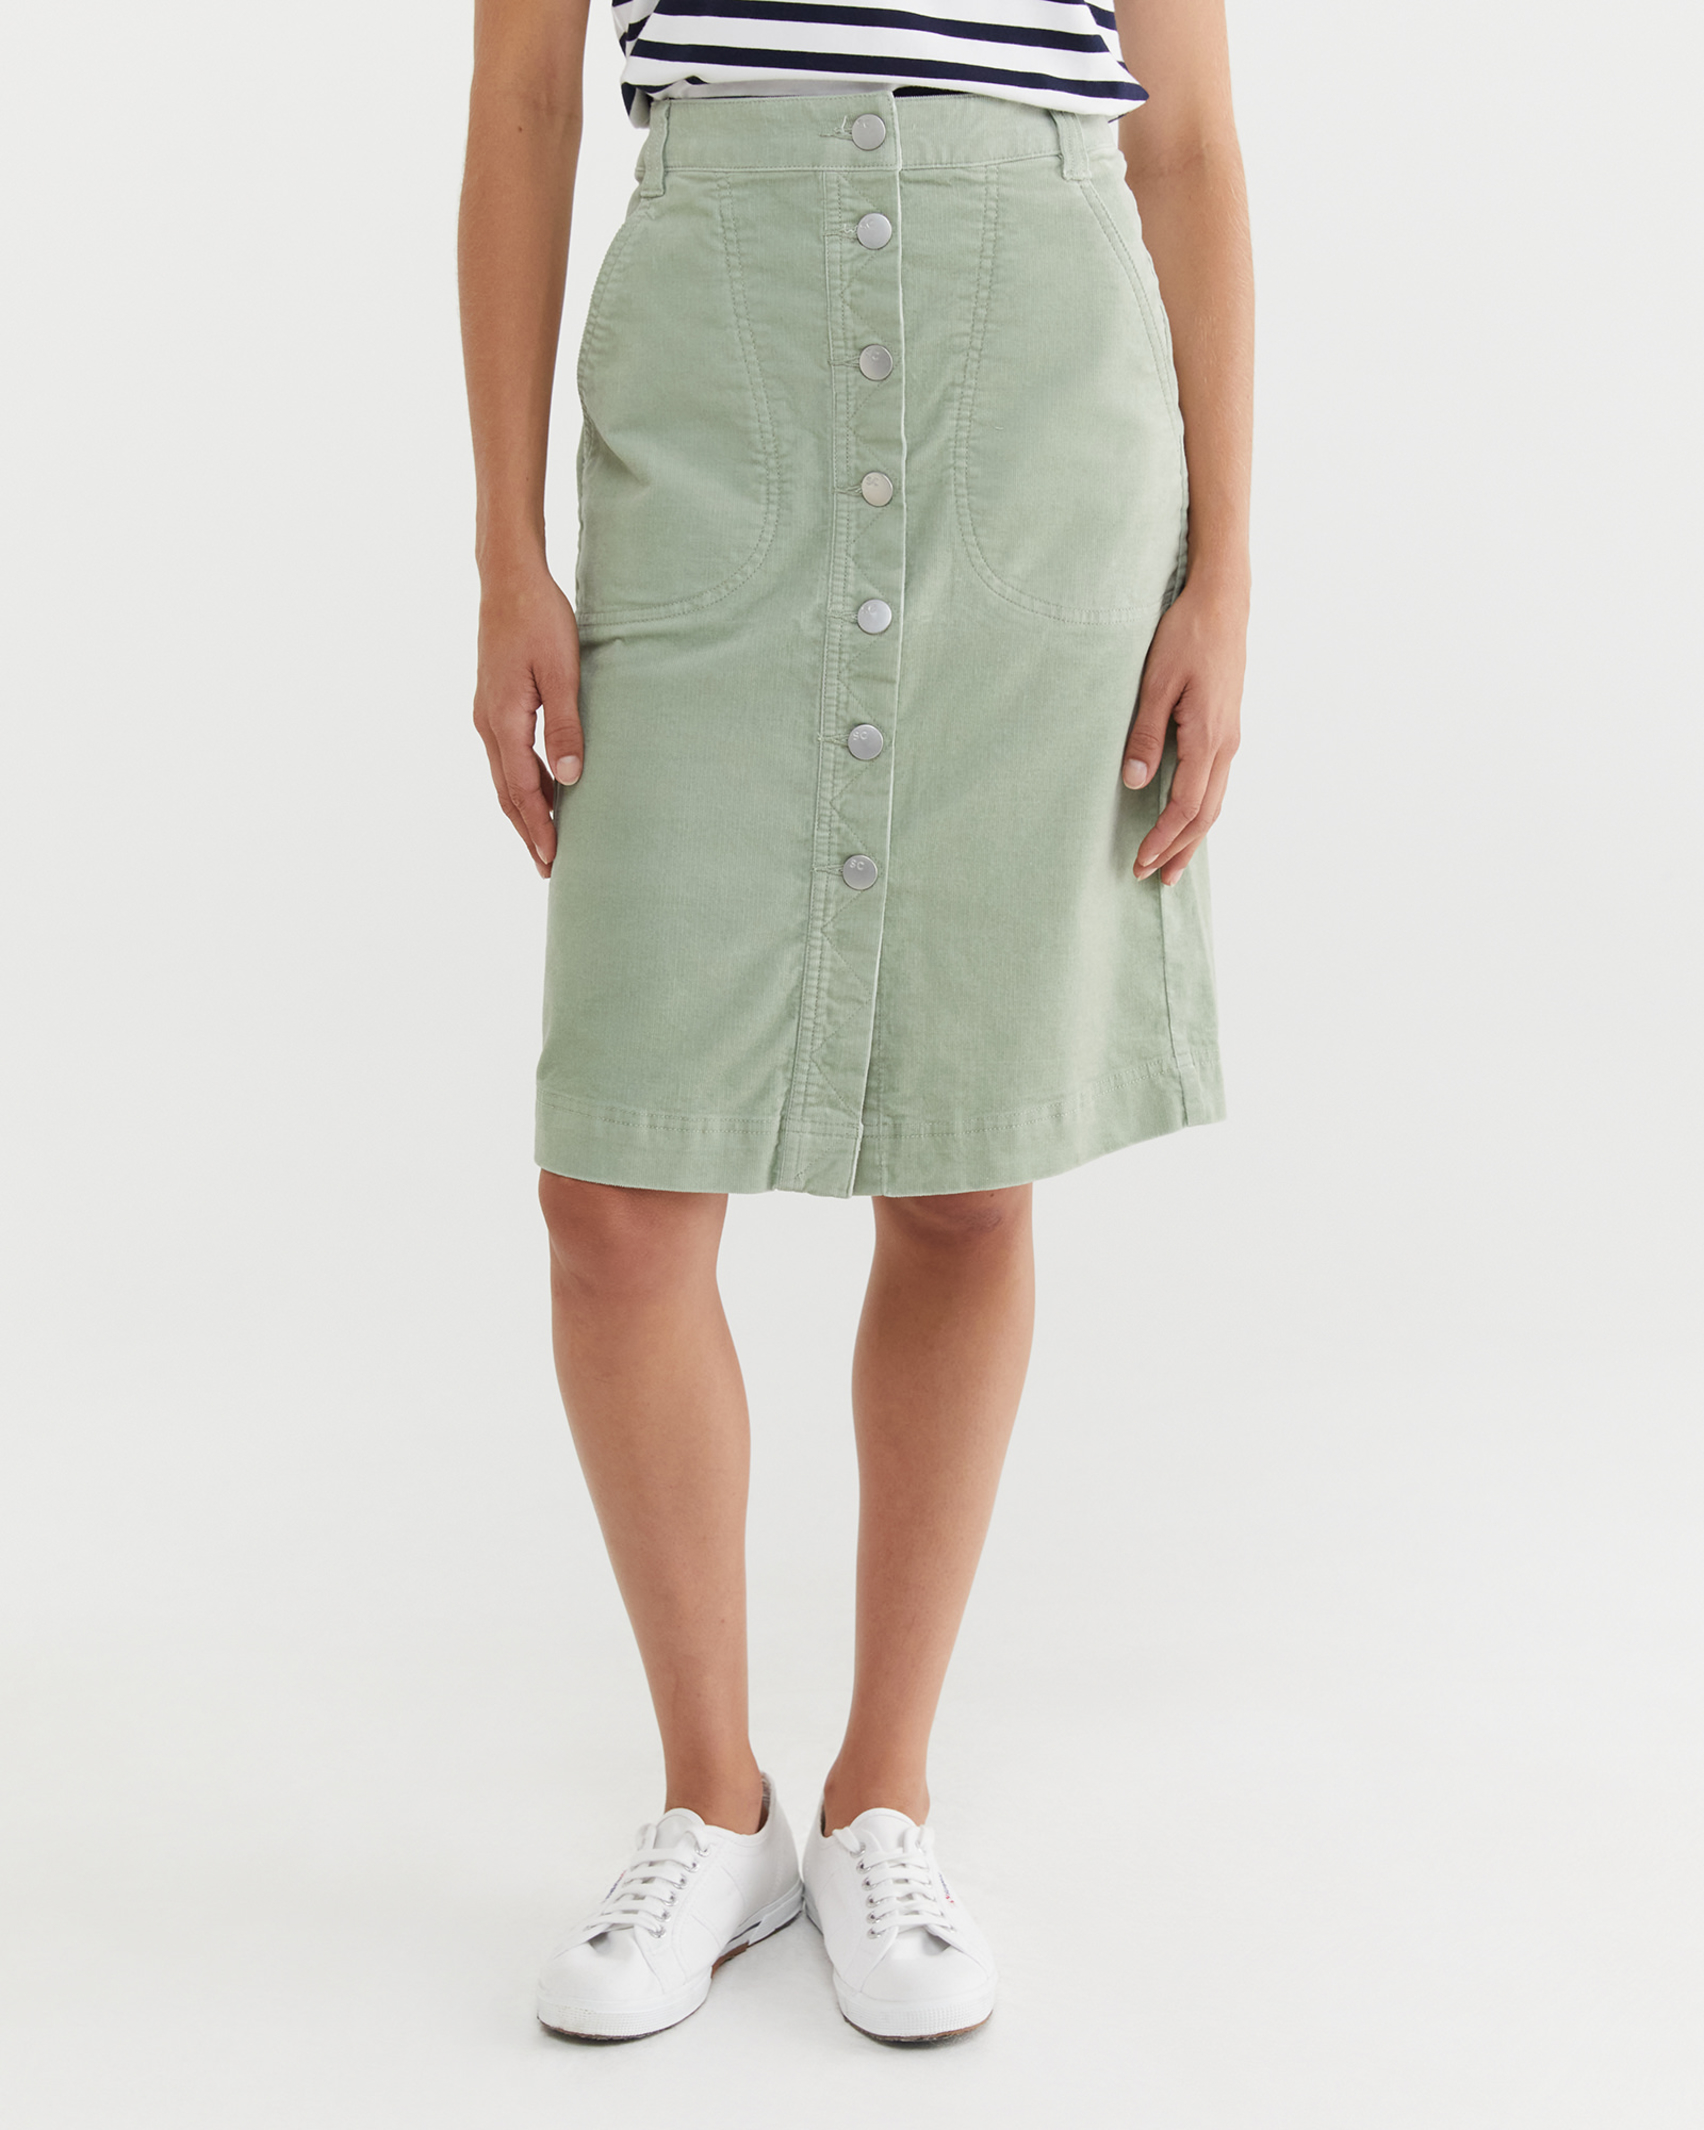 Cleo Cord Skirt in SAGE